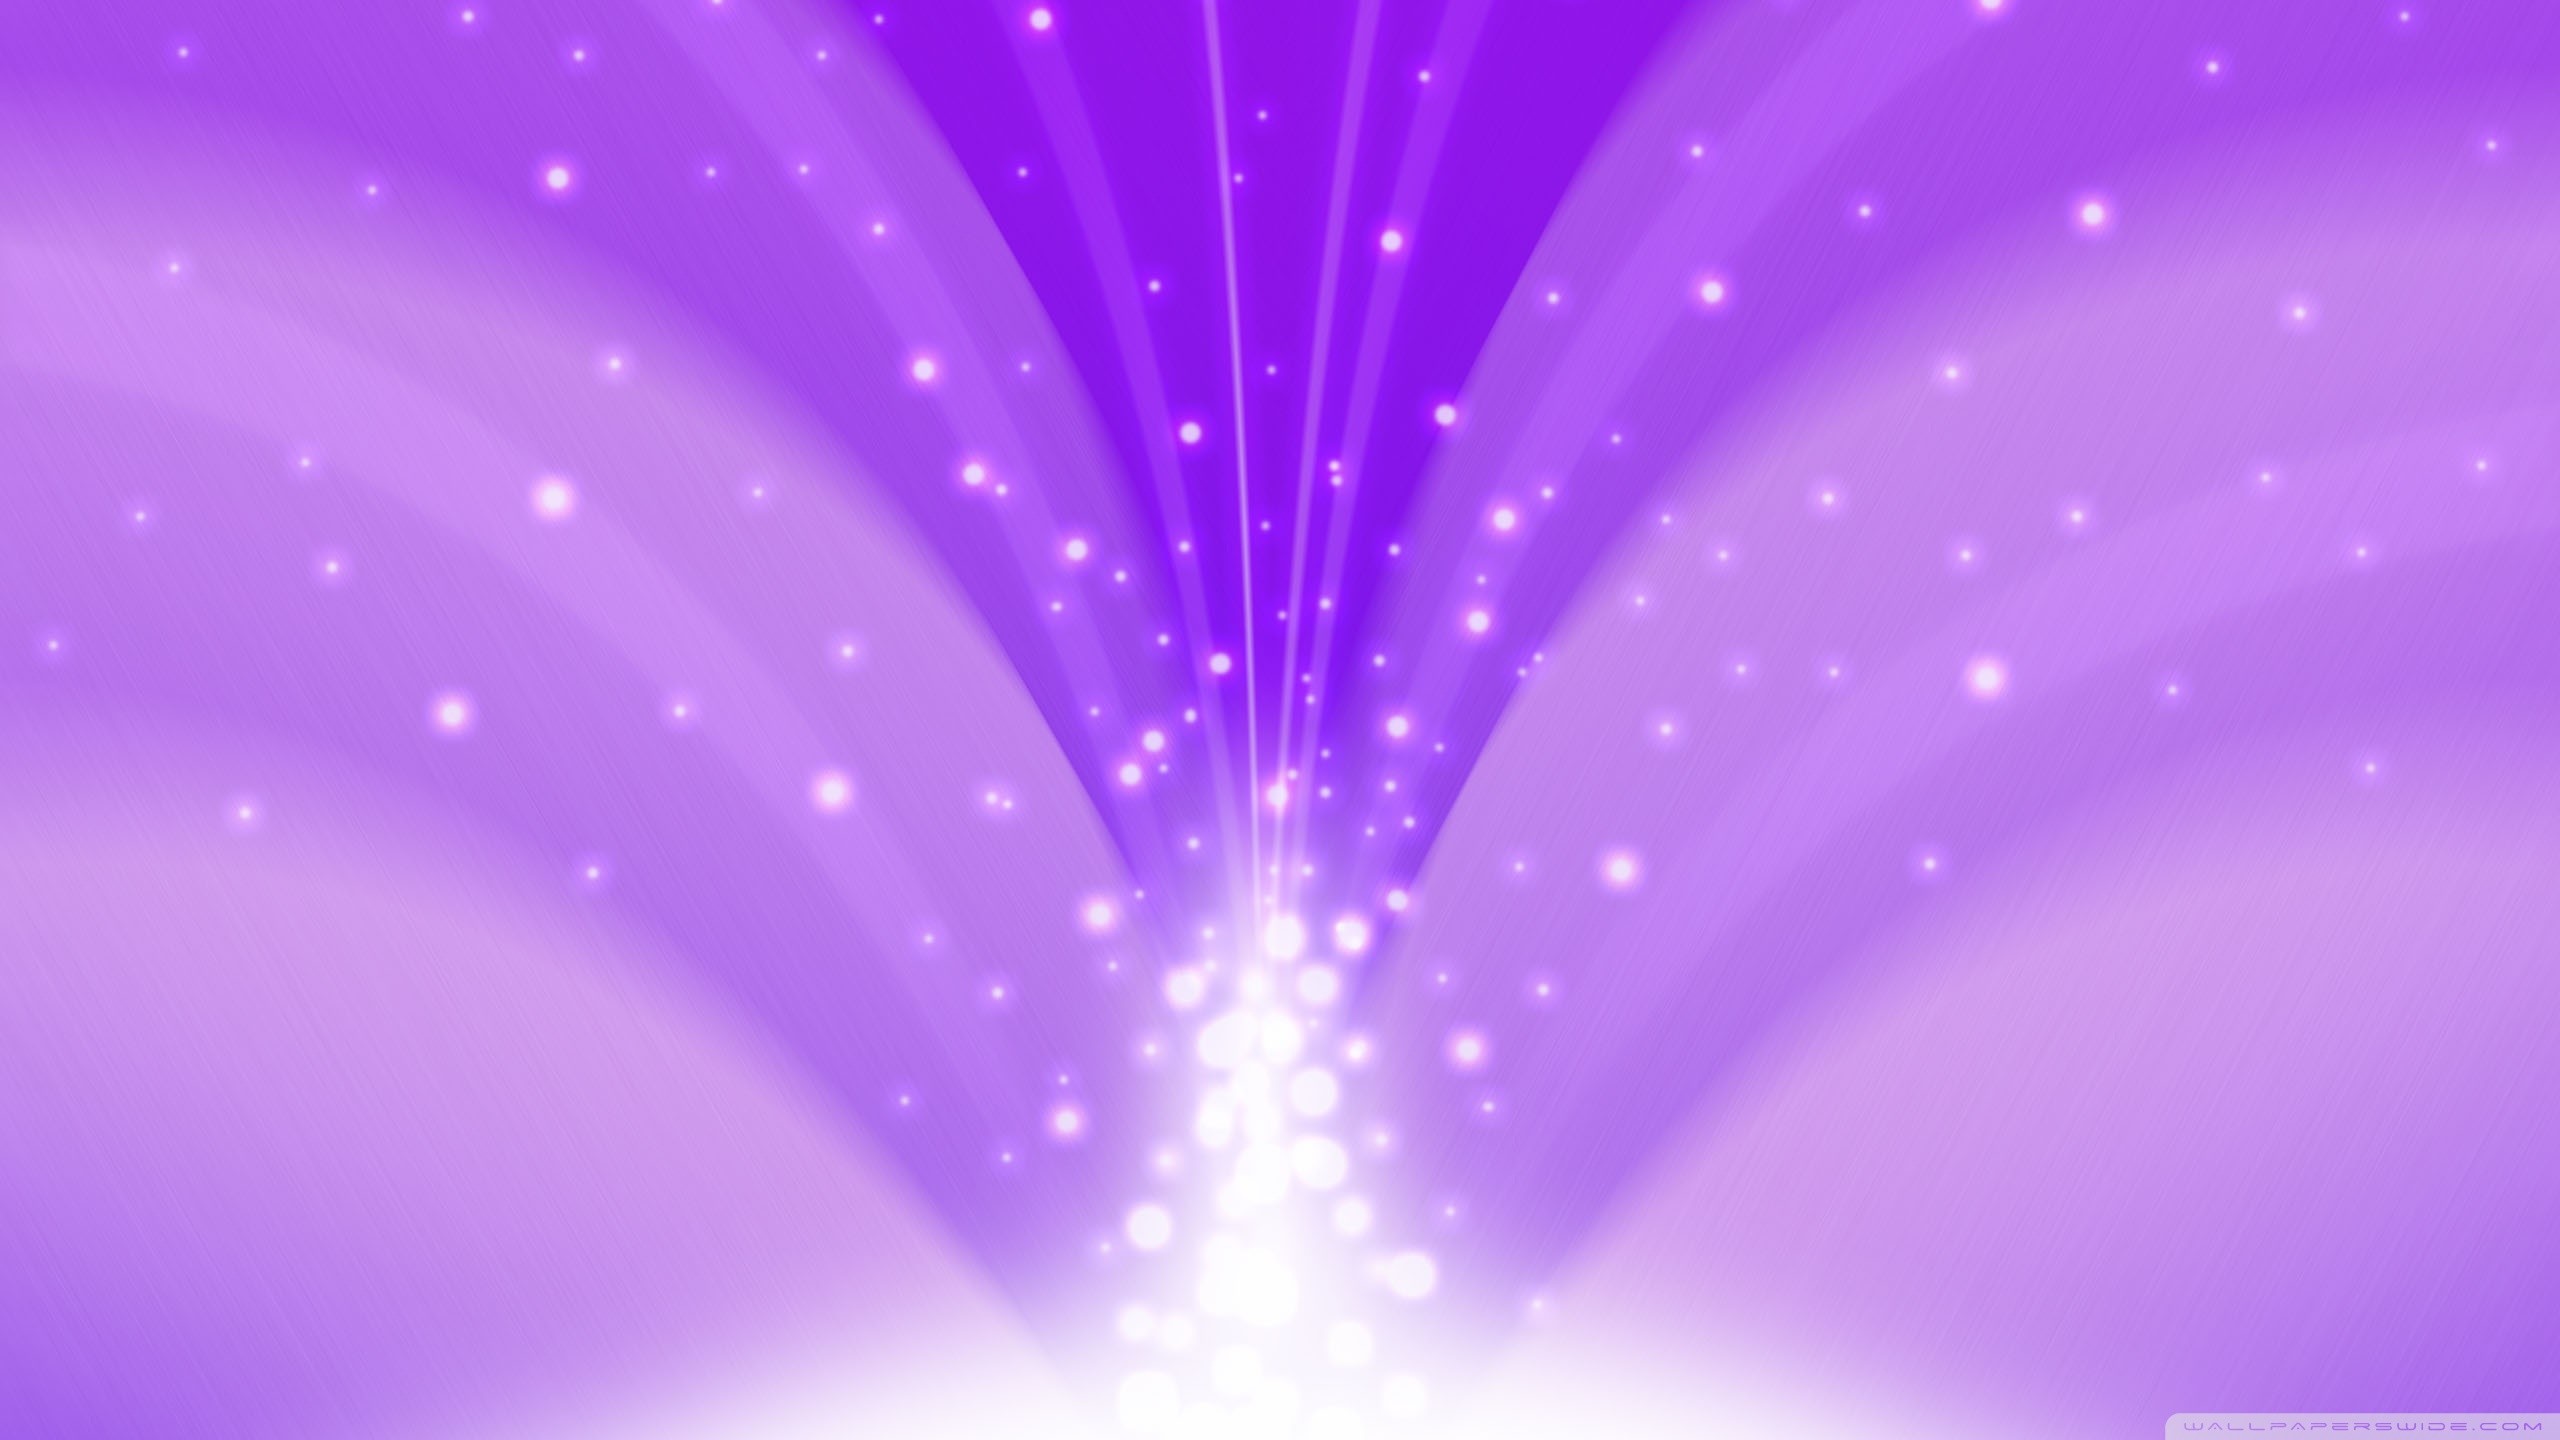 2560x1440 elegant cool light purple wallpaper with cool light pink backgrounds